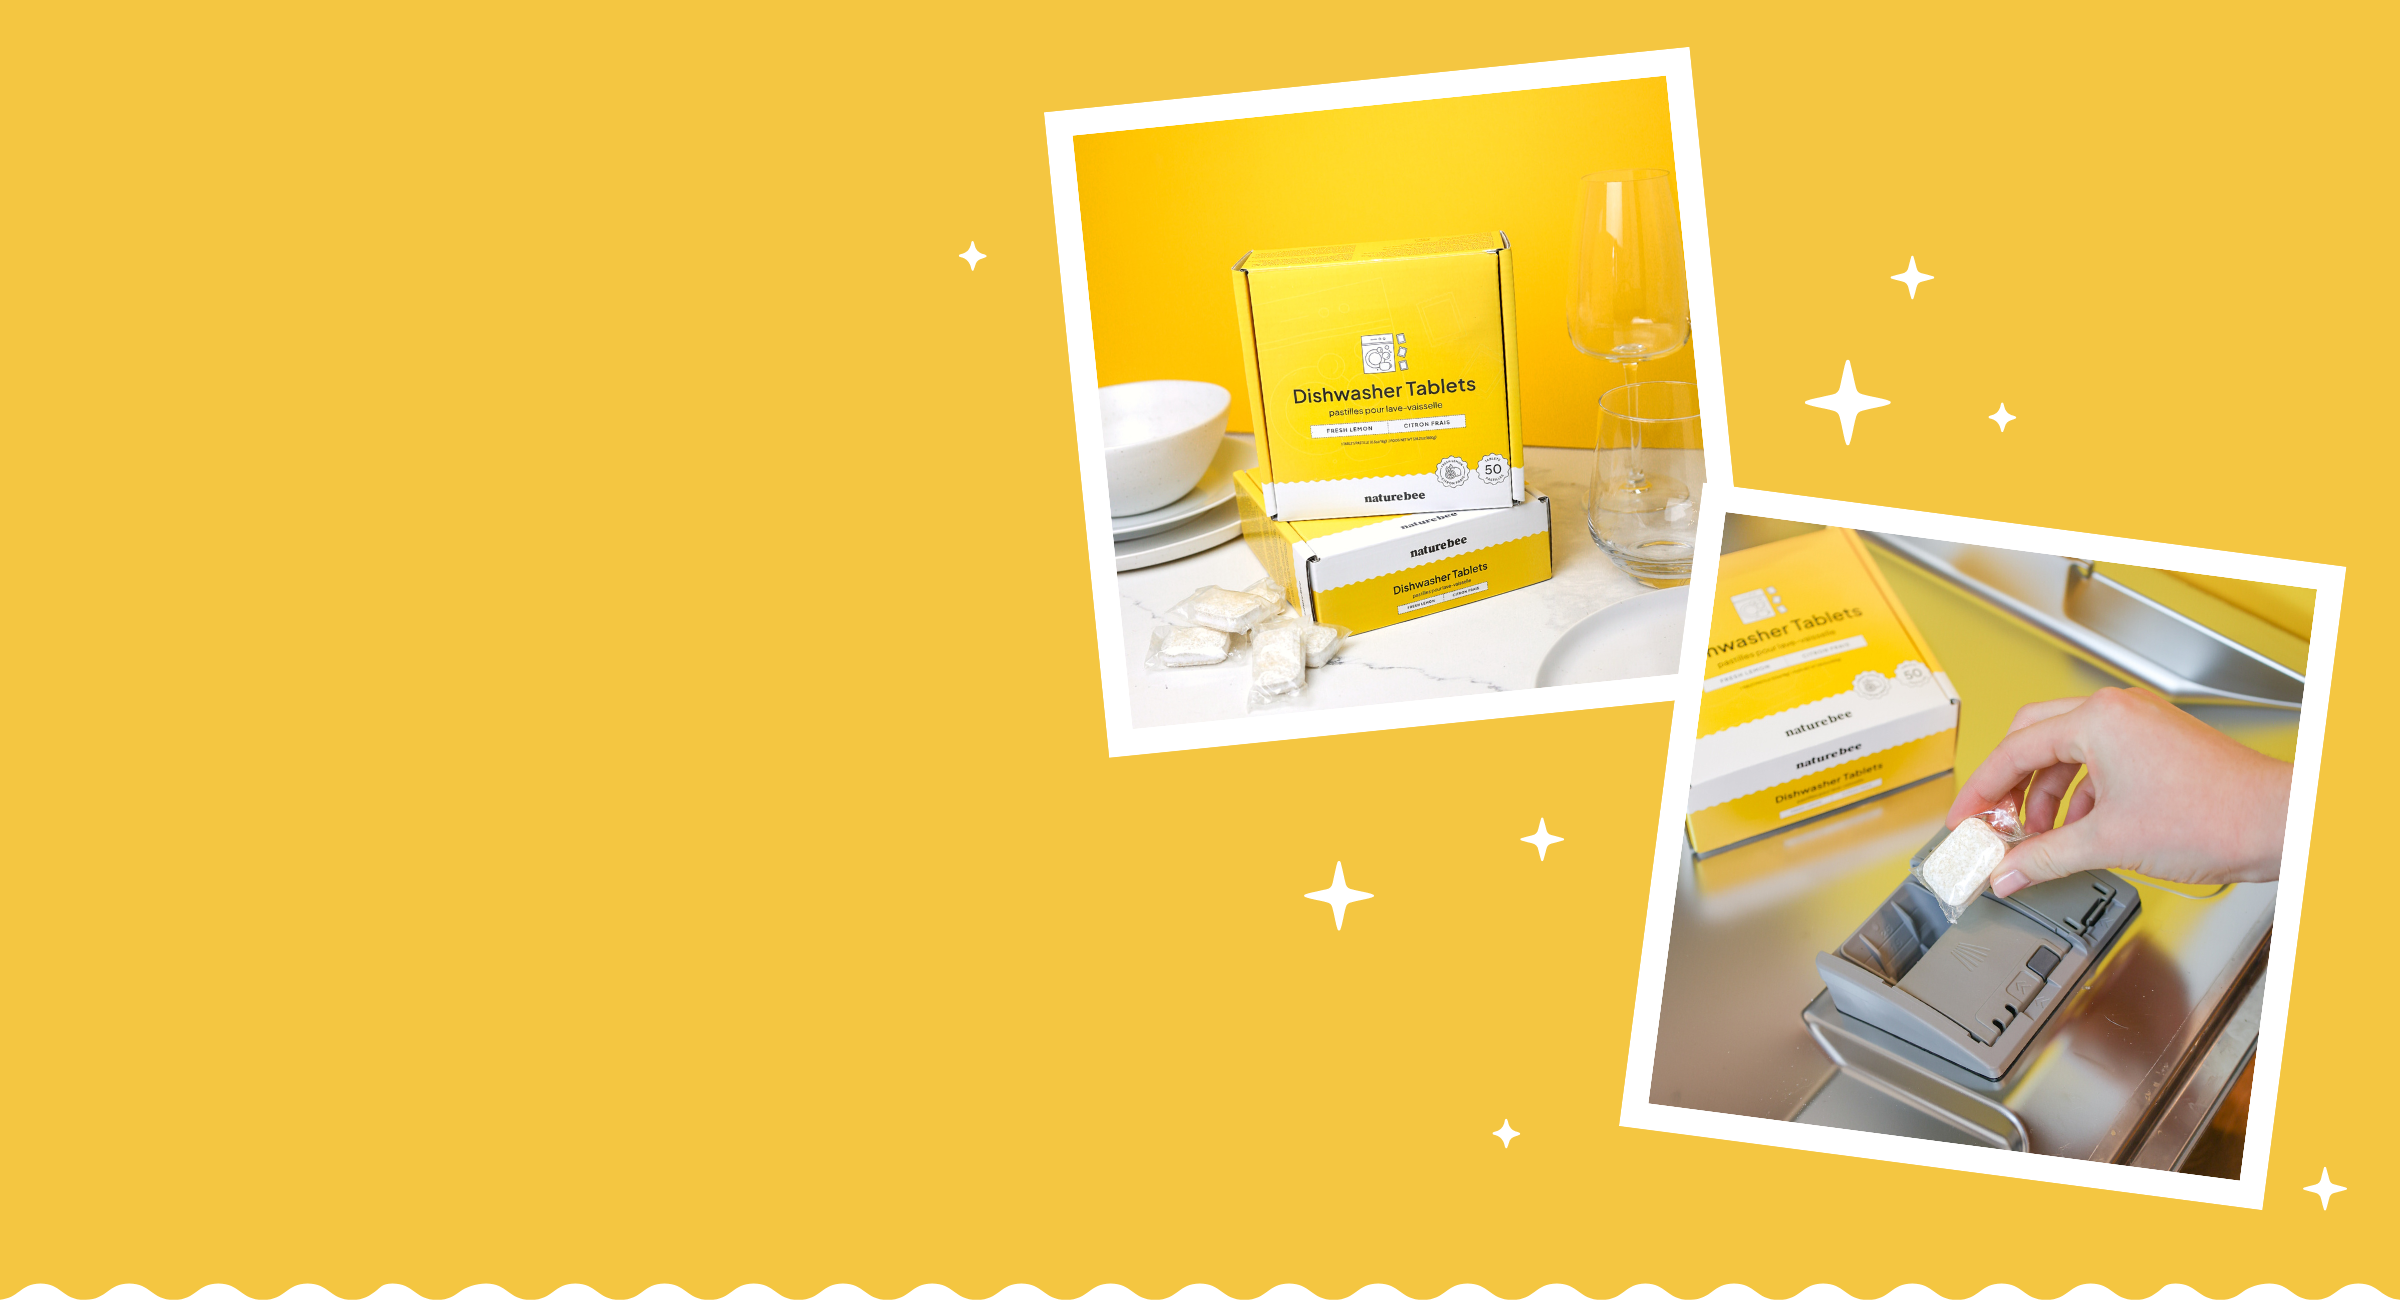 Header with yellow background showing two polaroid images: one of a bright fun yellow box of dishwasher tablets that is surrounded by clean sparkly dishes. The other is showing a tablet being put into the dishwasher.